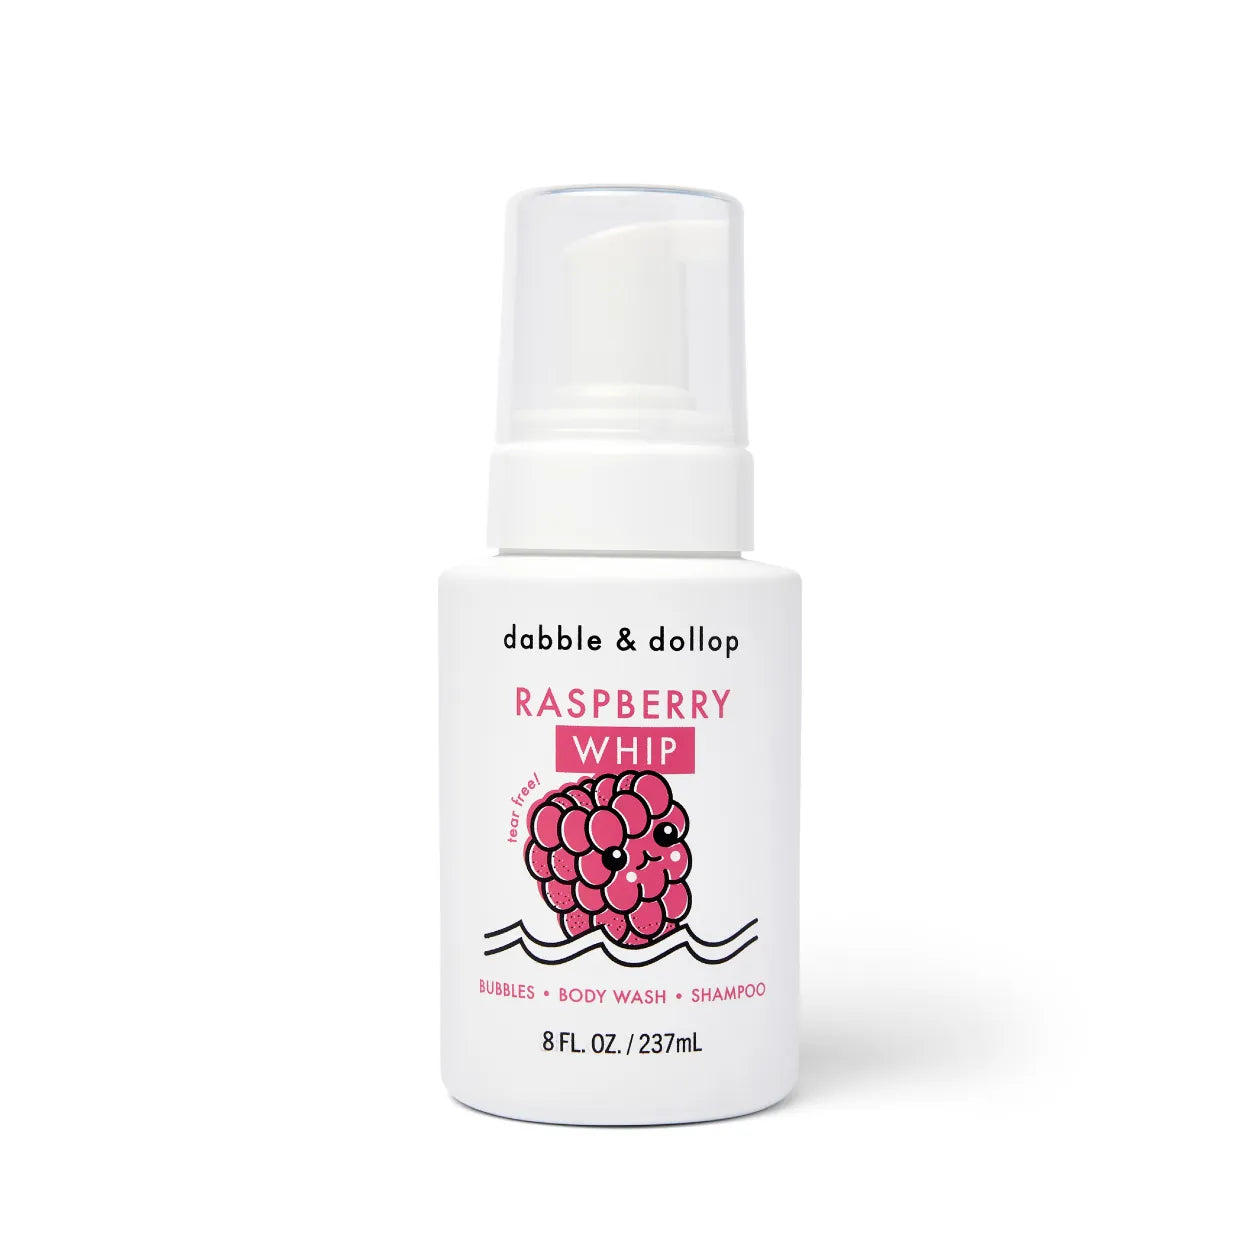 Dabble & Dollop Shampoo and Body Wash Raspberry Whip